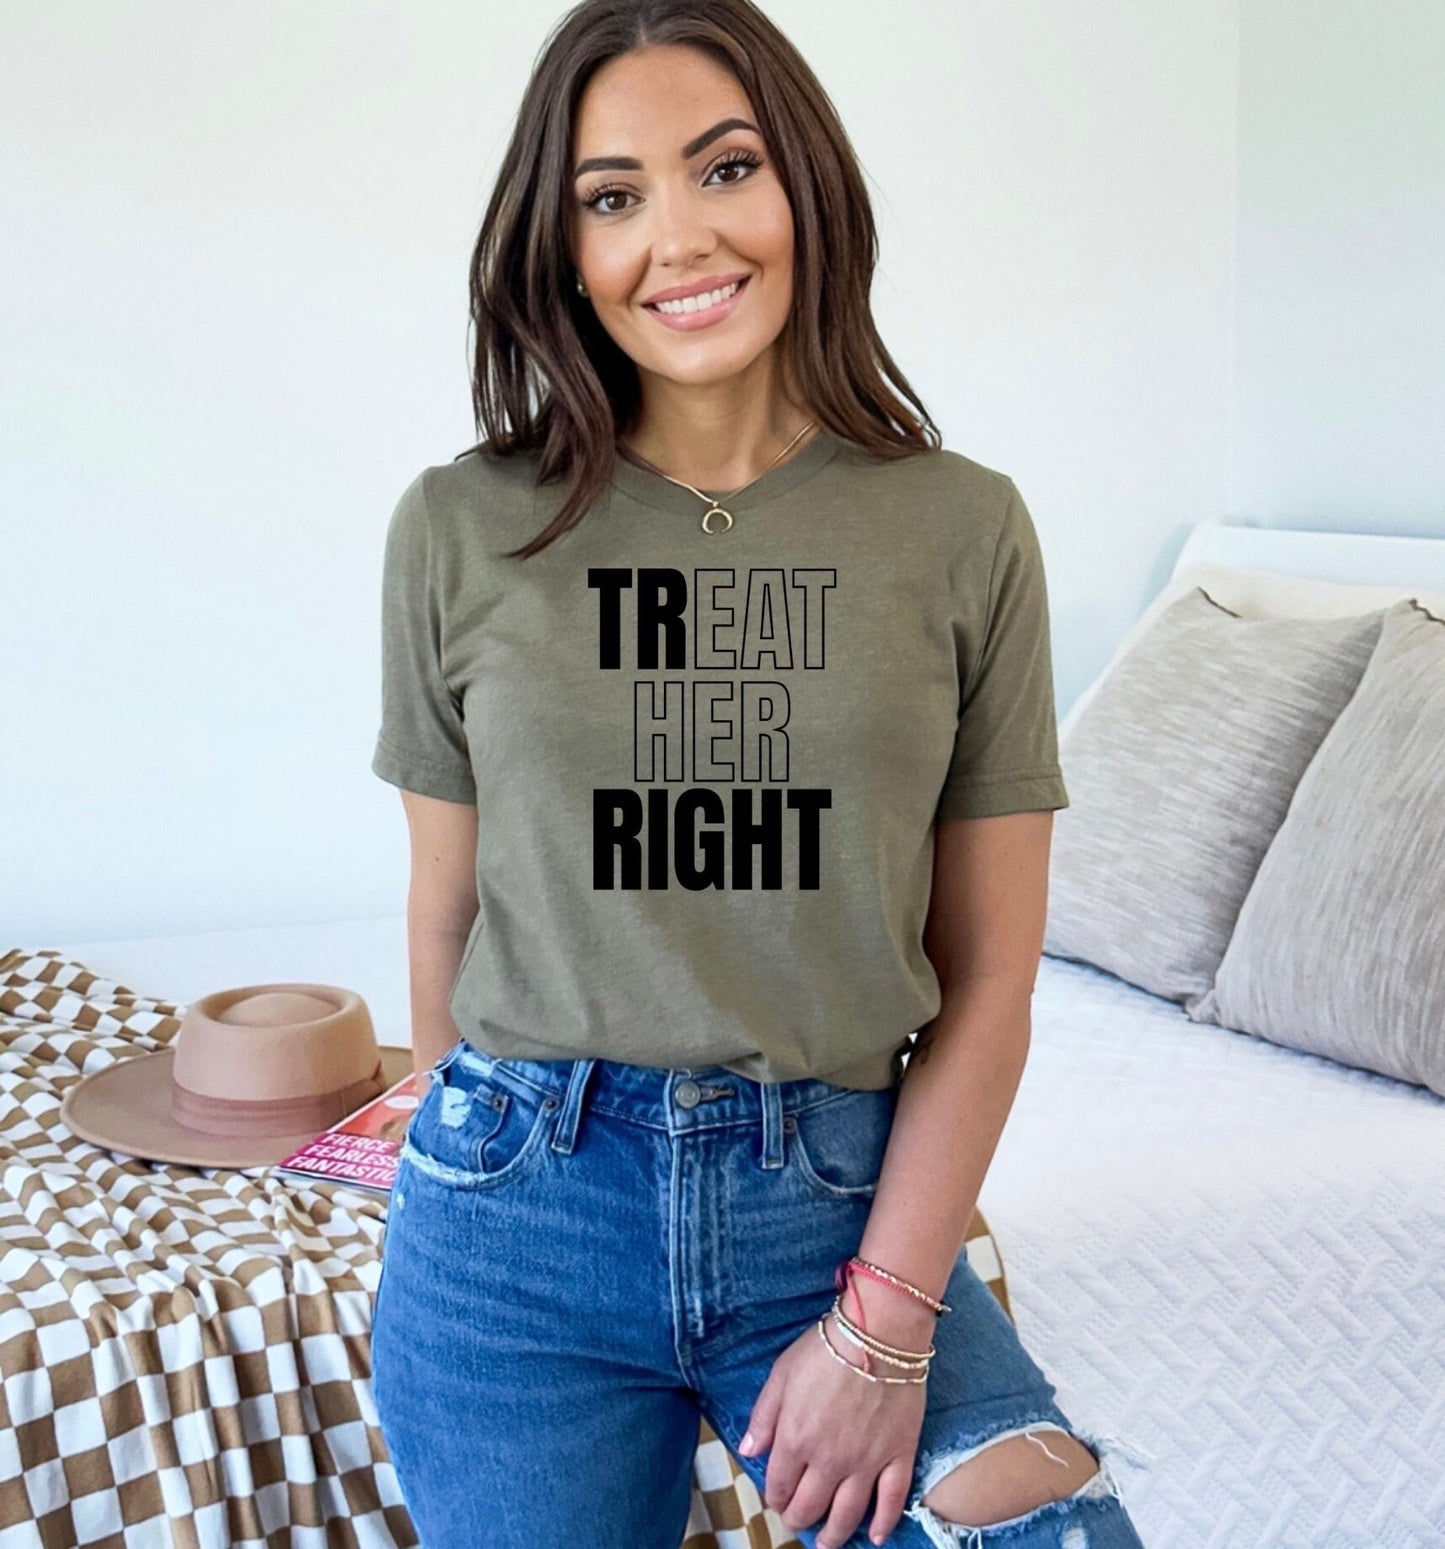 Treat Her Right Sweatshirt, Treat Her Right Tee, Treat Her Right Crewneck, Crewneck Sweatshirt, Oversized Sweater, Comfy Sweater, Sexy Tee